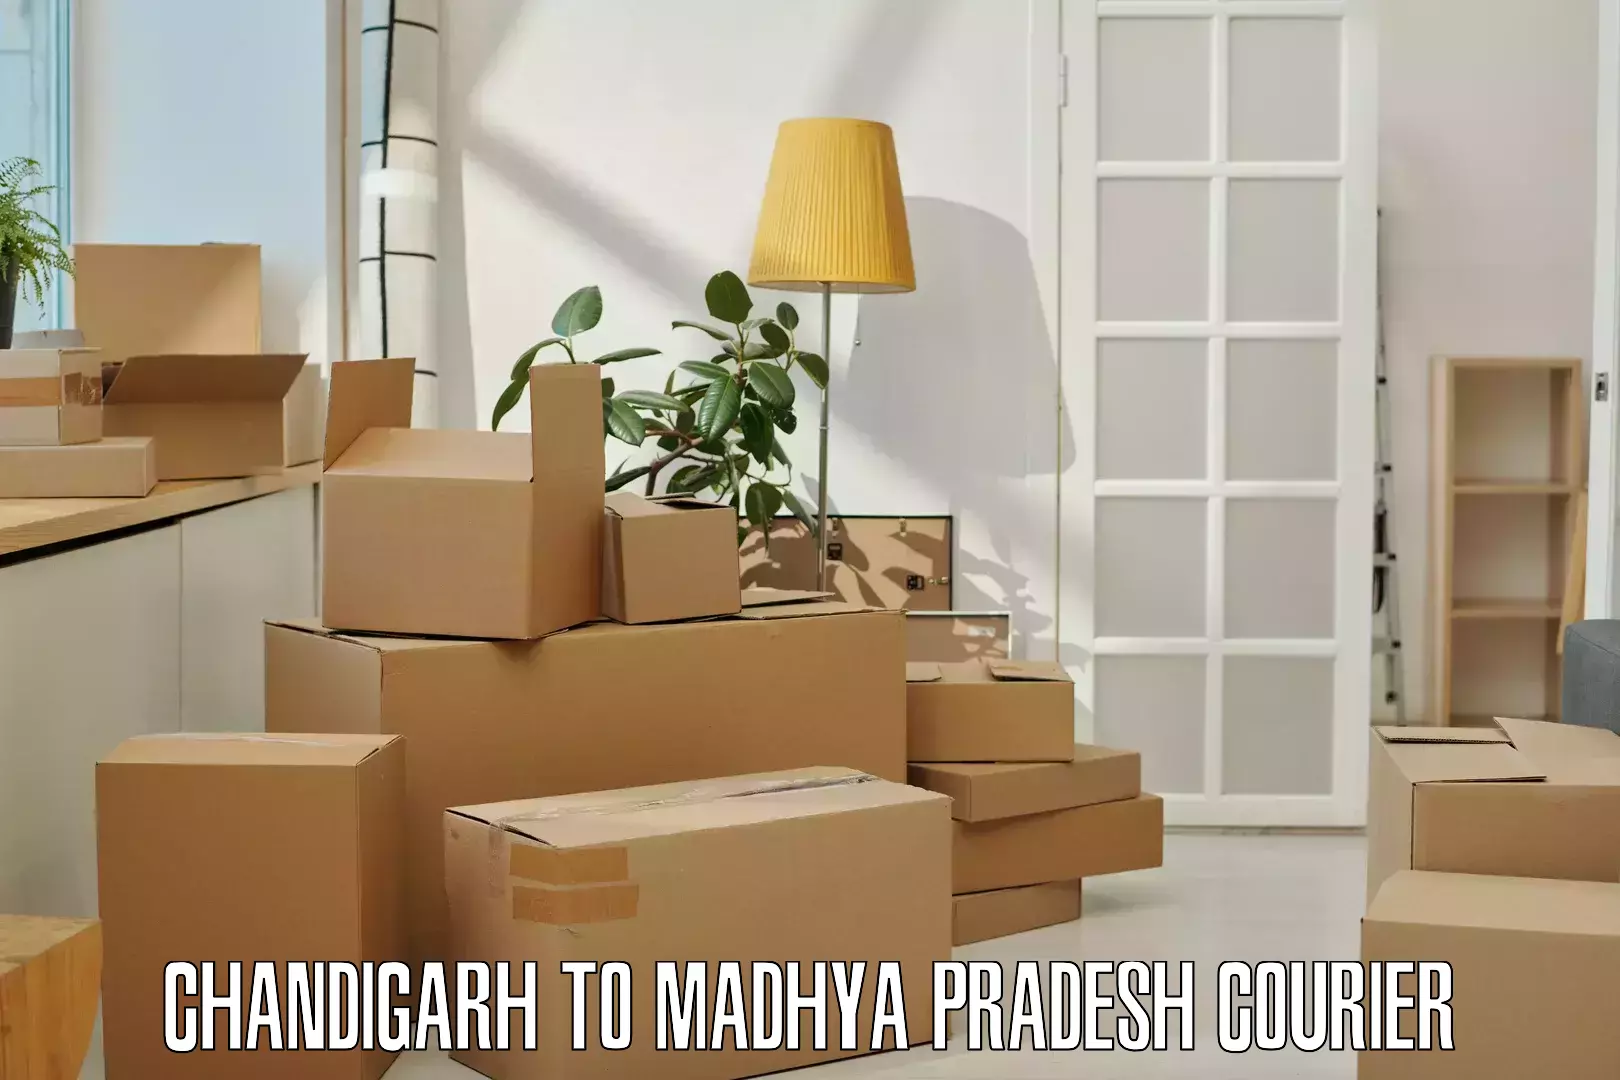 Package delivery network Chandigarh to Amarpatan